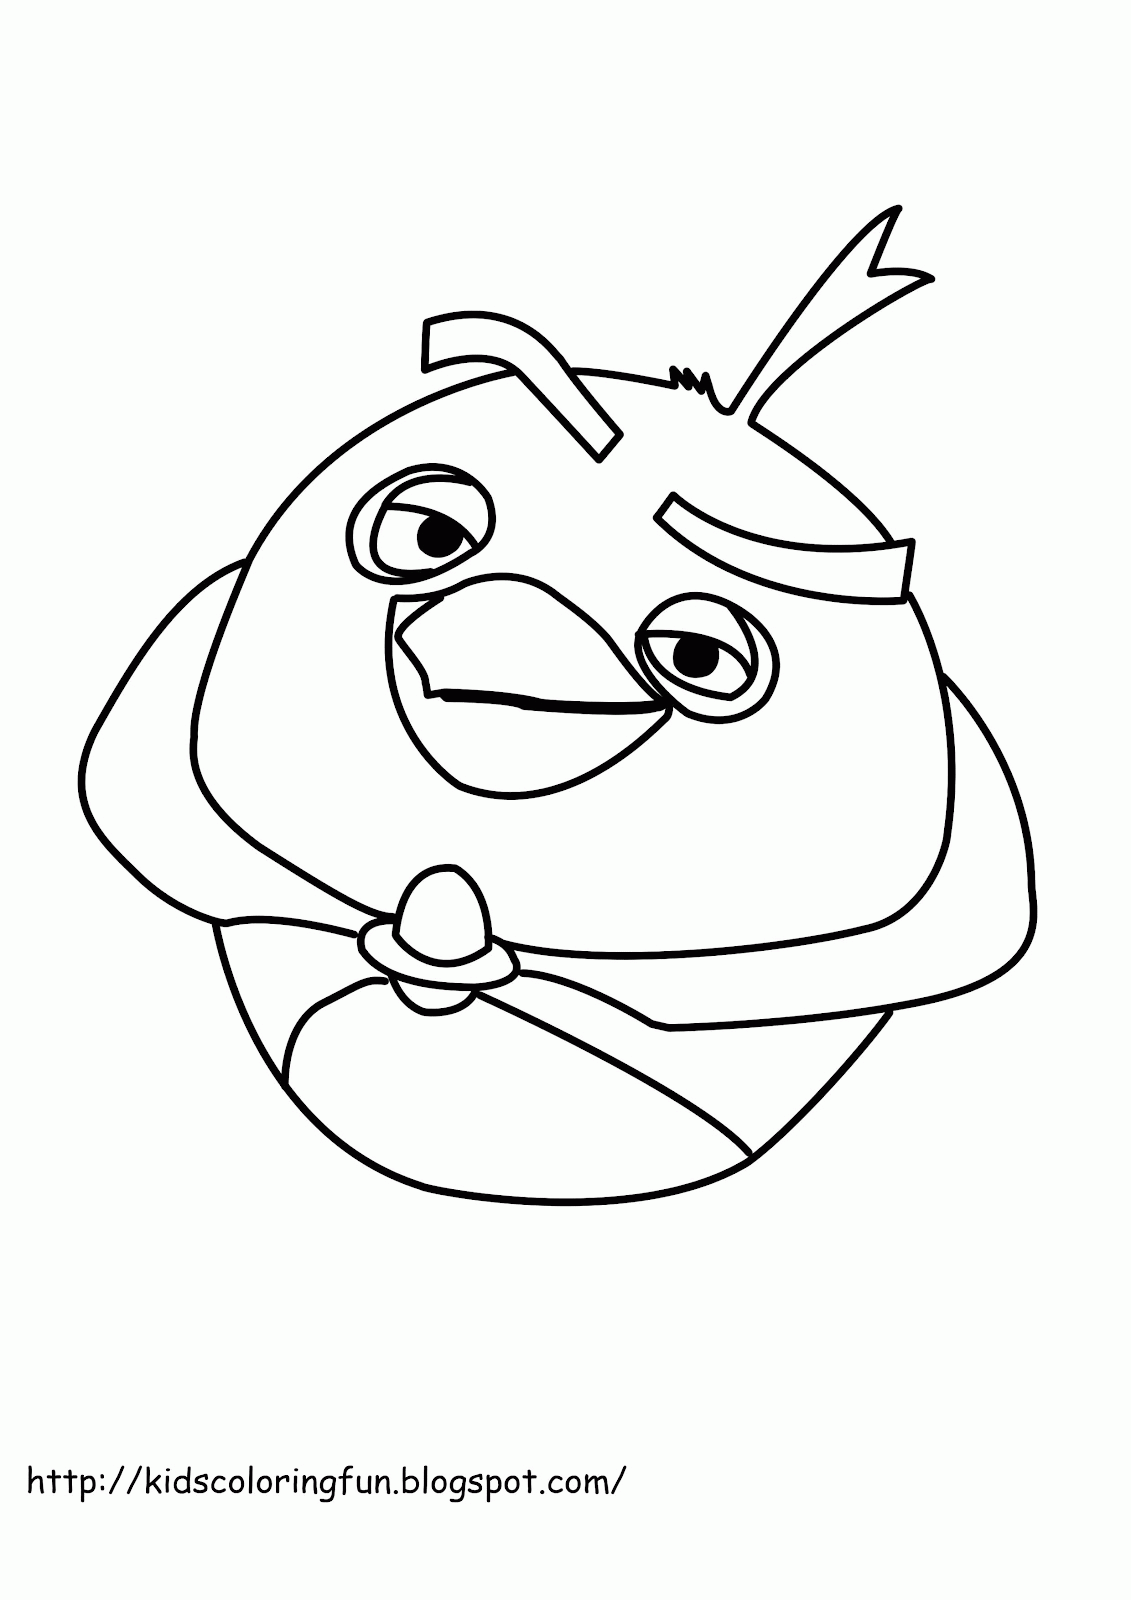 Angry birds coloring pages - Soft Portal